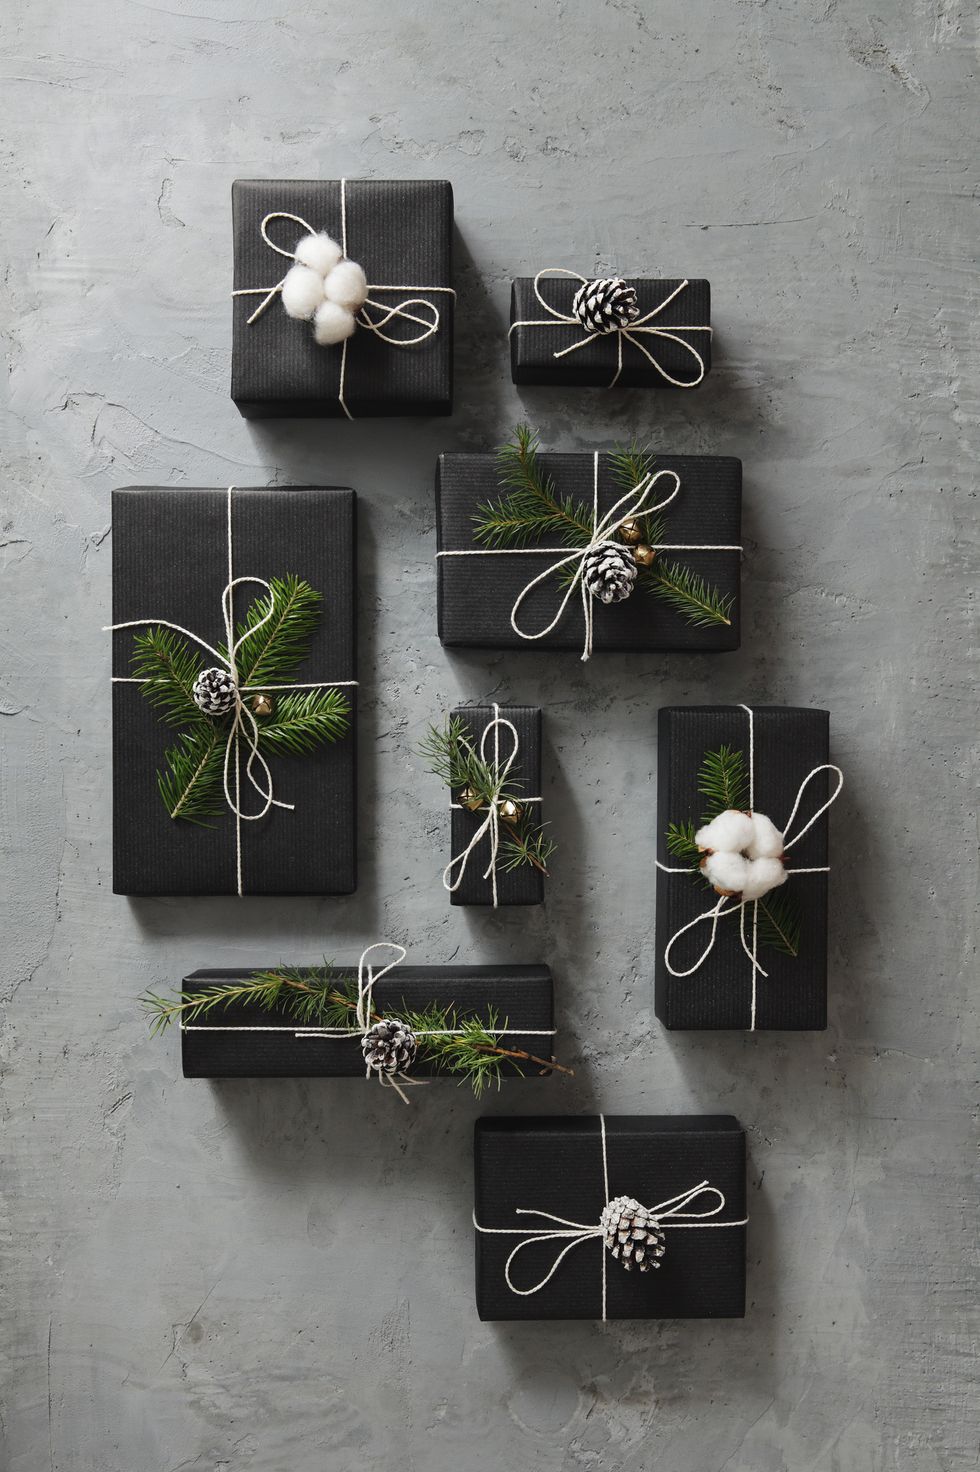 How to Make Your Gifts Look Amazing